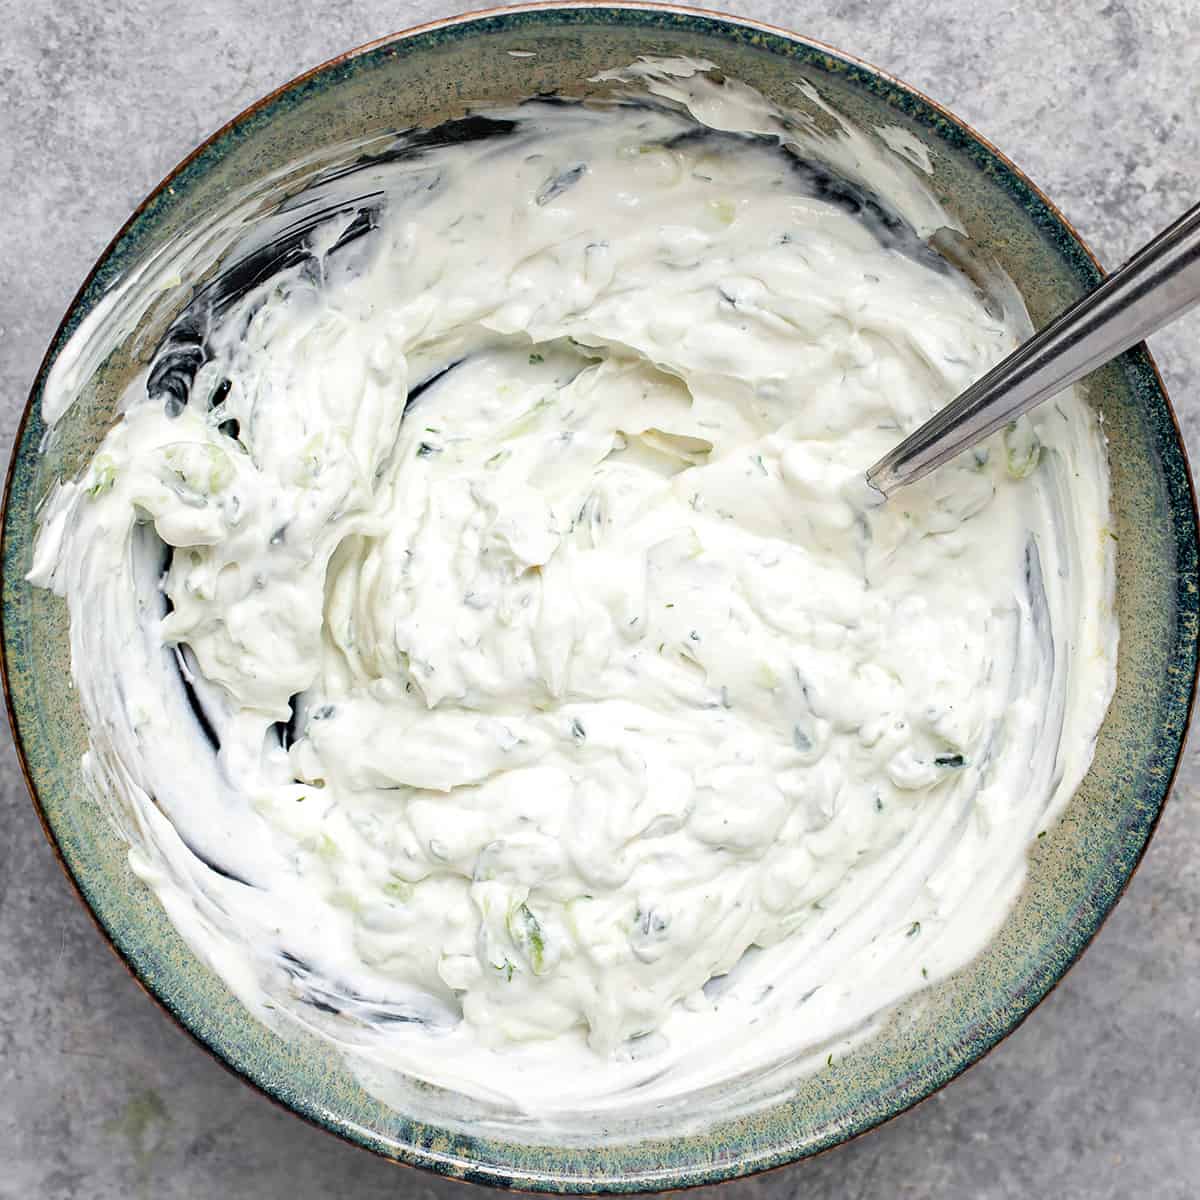 How to Make Tzatziki Sauce - finished sauce in a bowl ready to chill